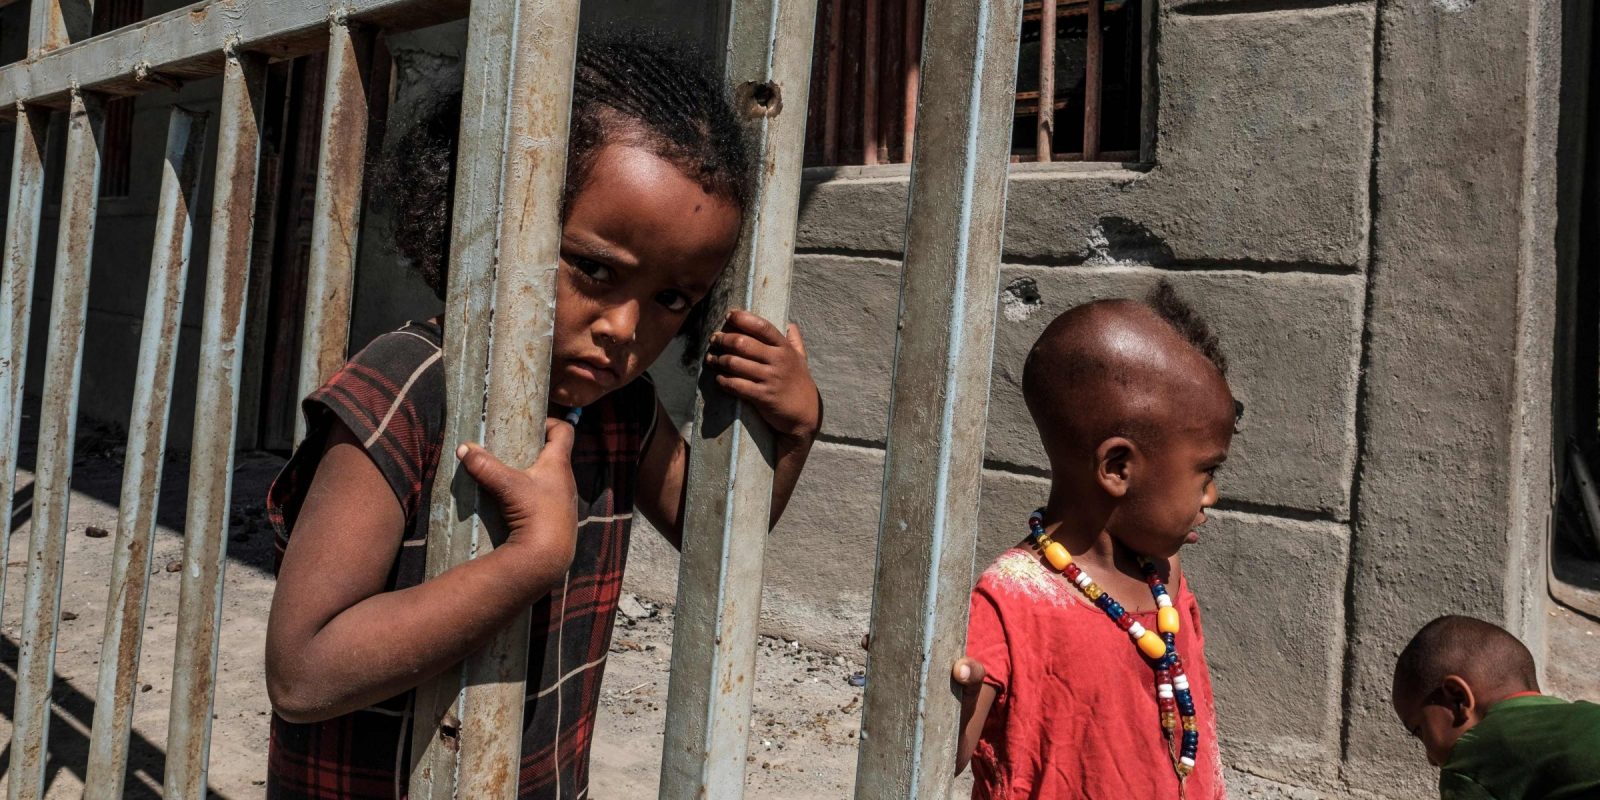 UNICEF warns millions of children in Ethiopia's Tigray out of reach